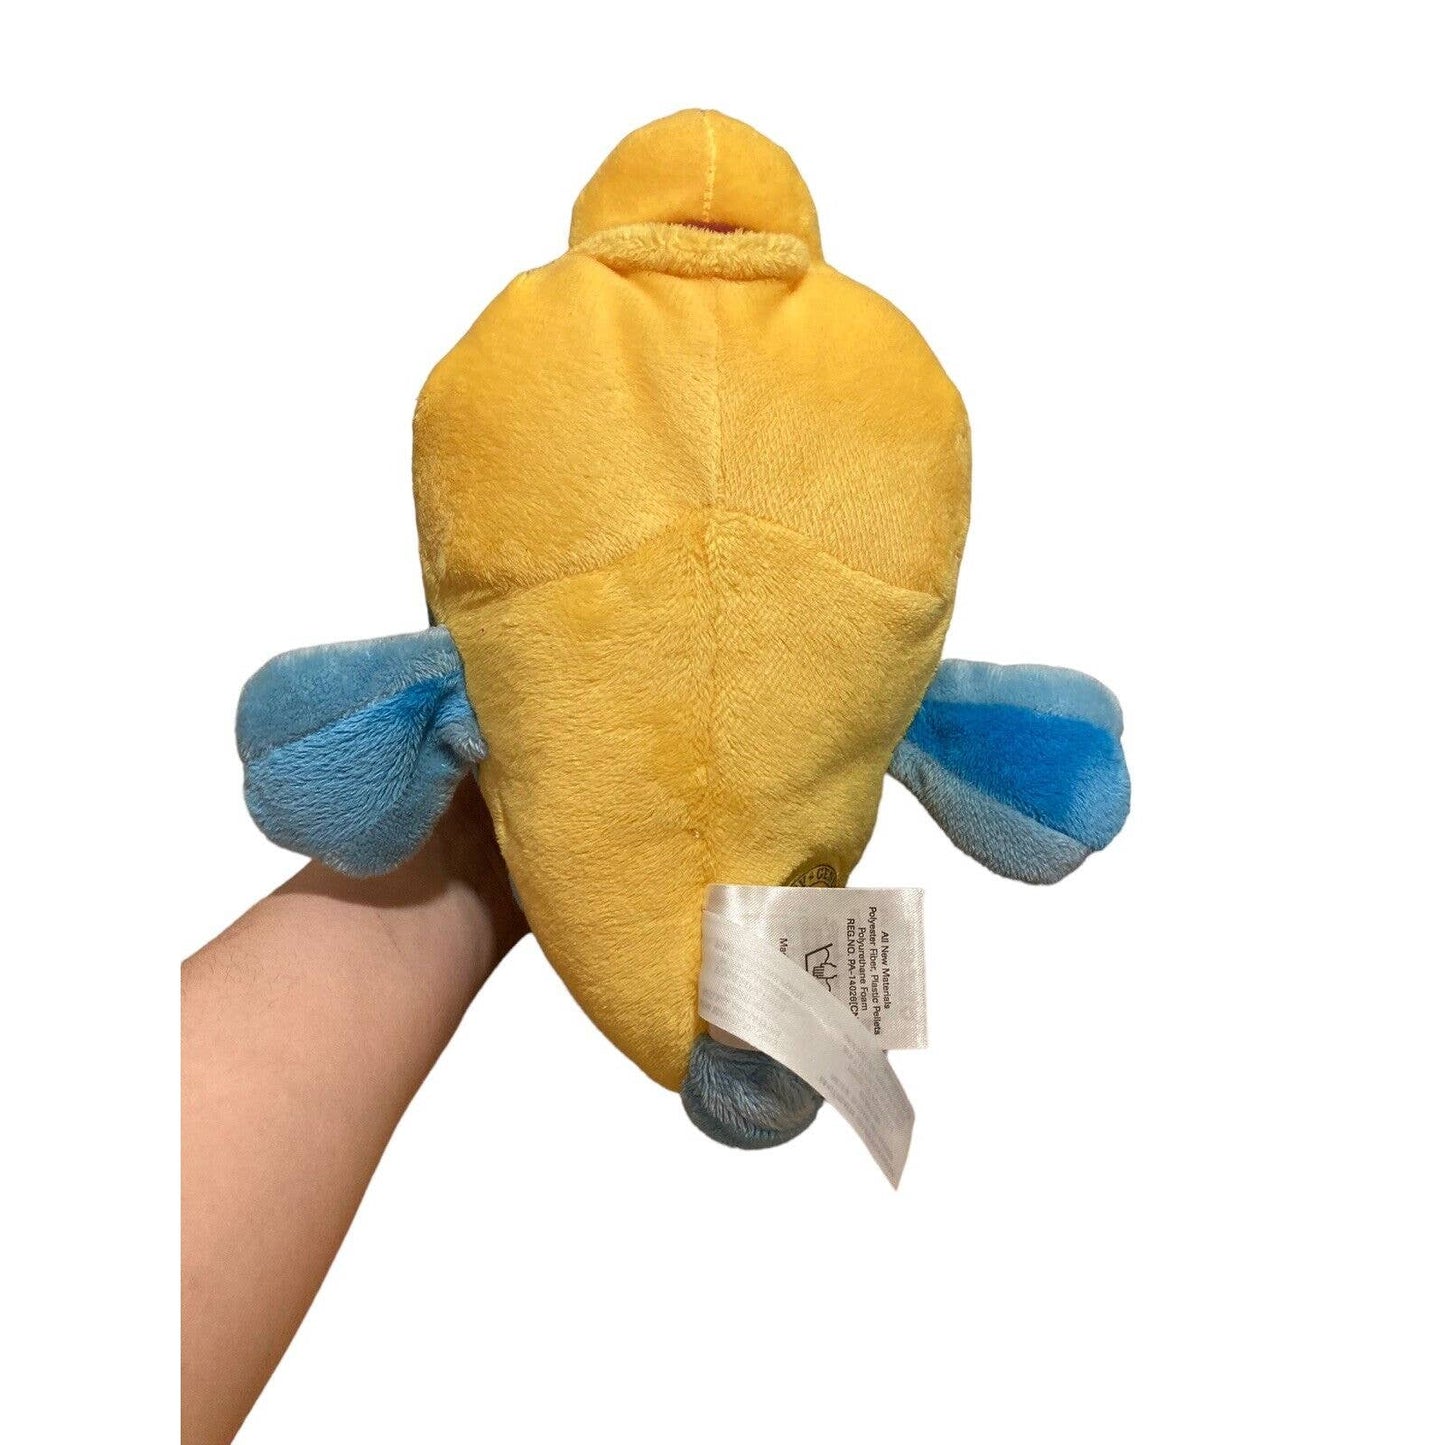 The Disney Store The Little Mermaid Flounder 11” Stuffed Plush Toy Authentic